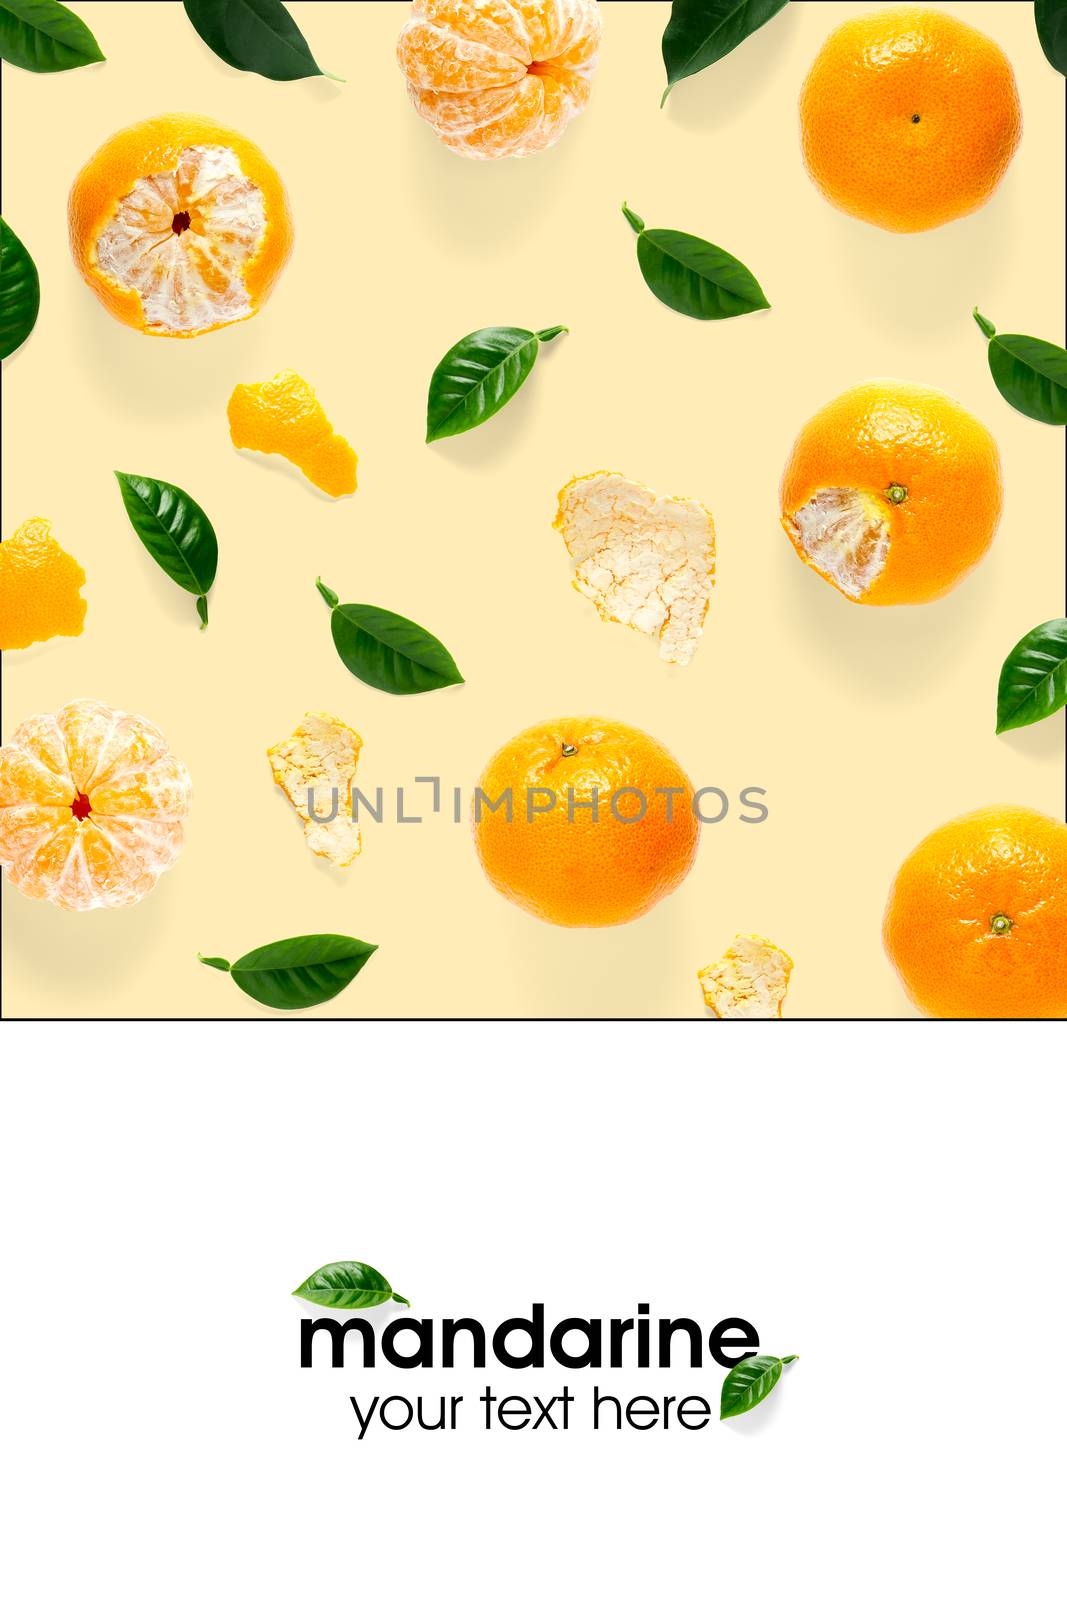 Creative layout of tangerines, mandarines. Unpeeled and peeled ripe tangerines, mandarines, clementines with leaves isolated on white background. by PhotoTime